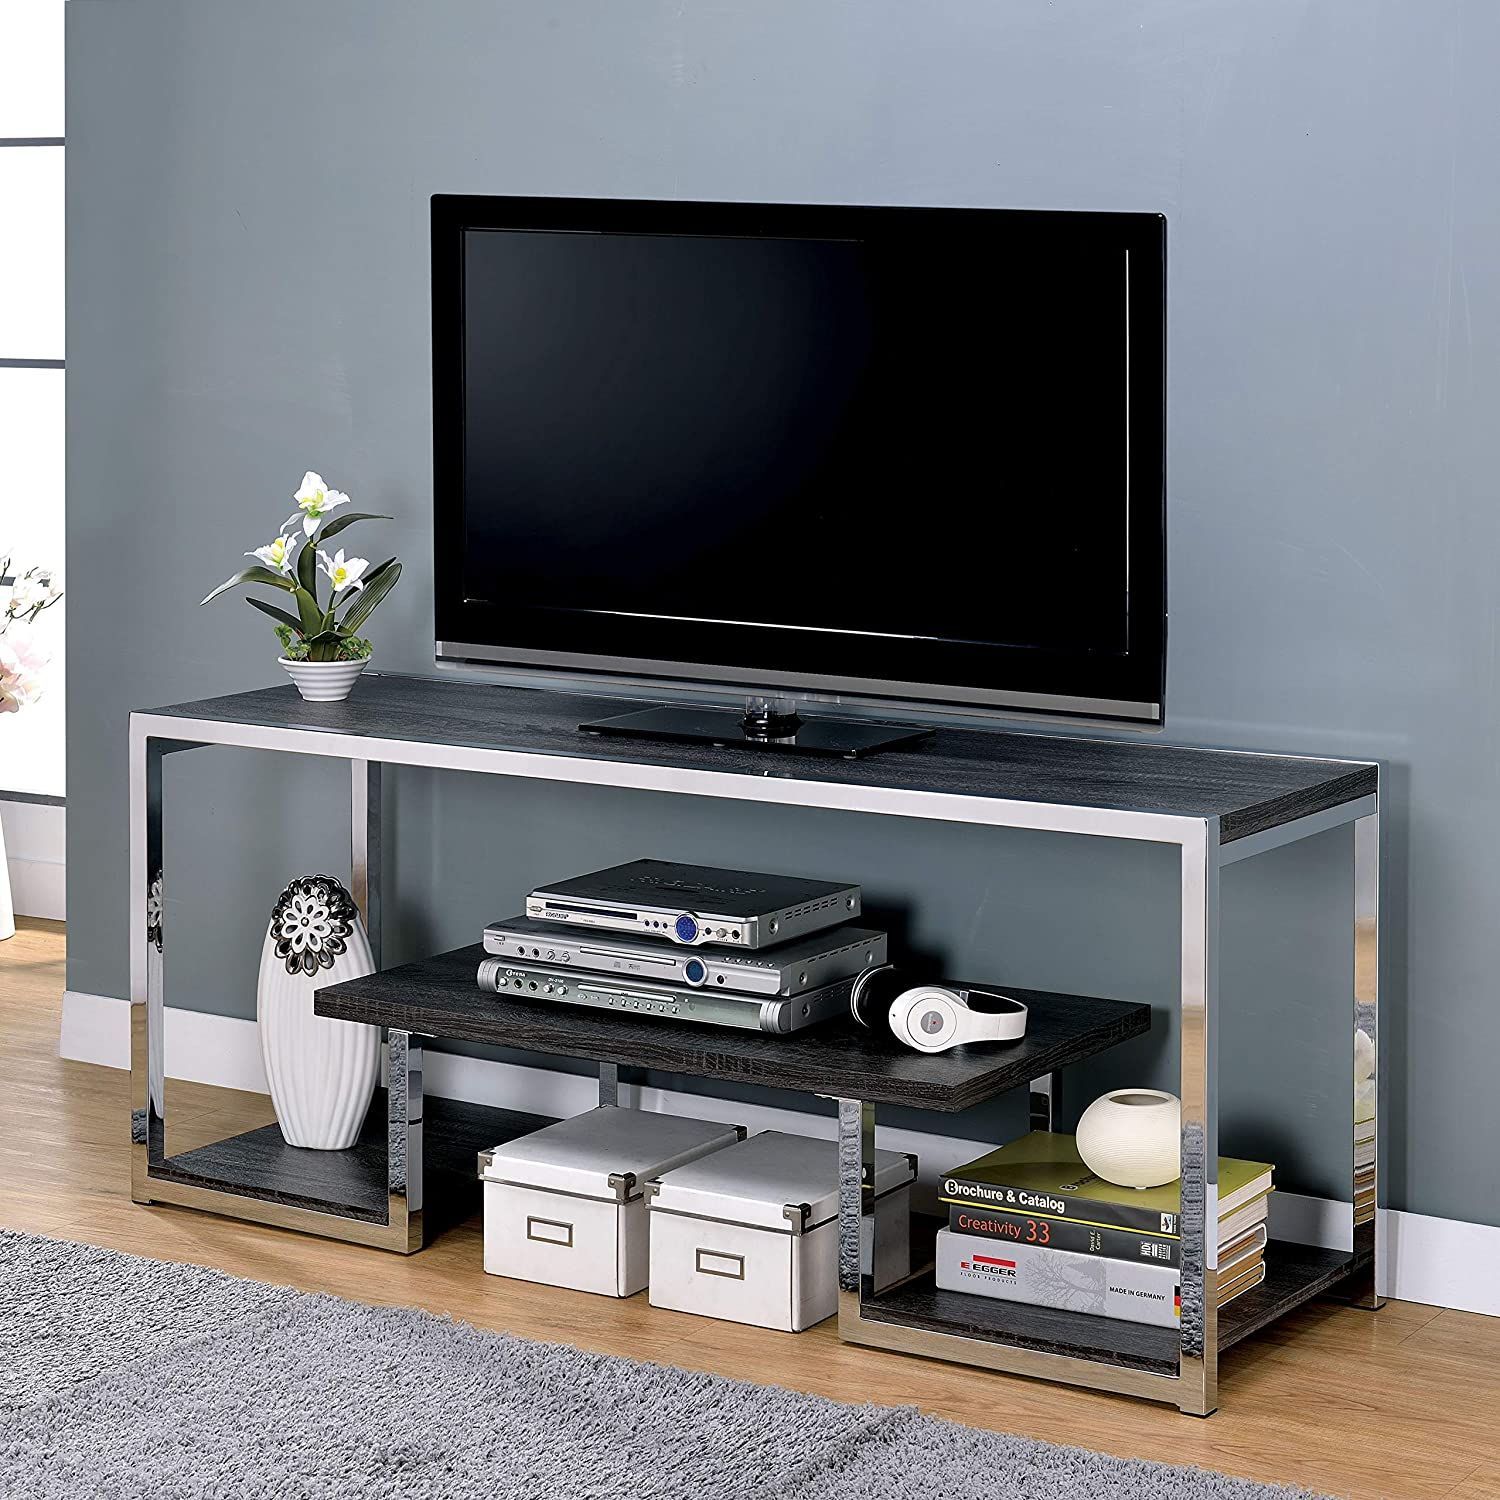 Contemporary 60 Inch Metal 3 Shelf Tv Stand – 72 Inches Silver Casual For Modern Stands With Shelves (View 10 of 20)